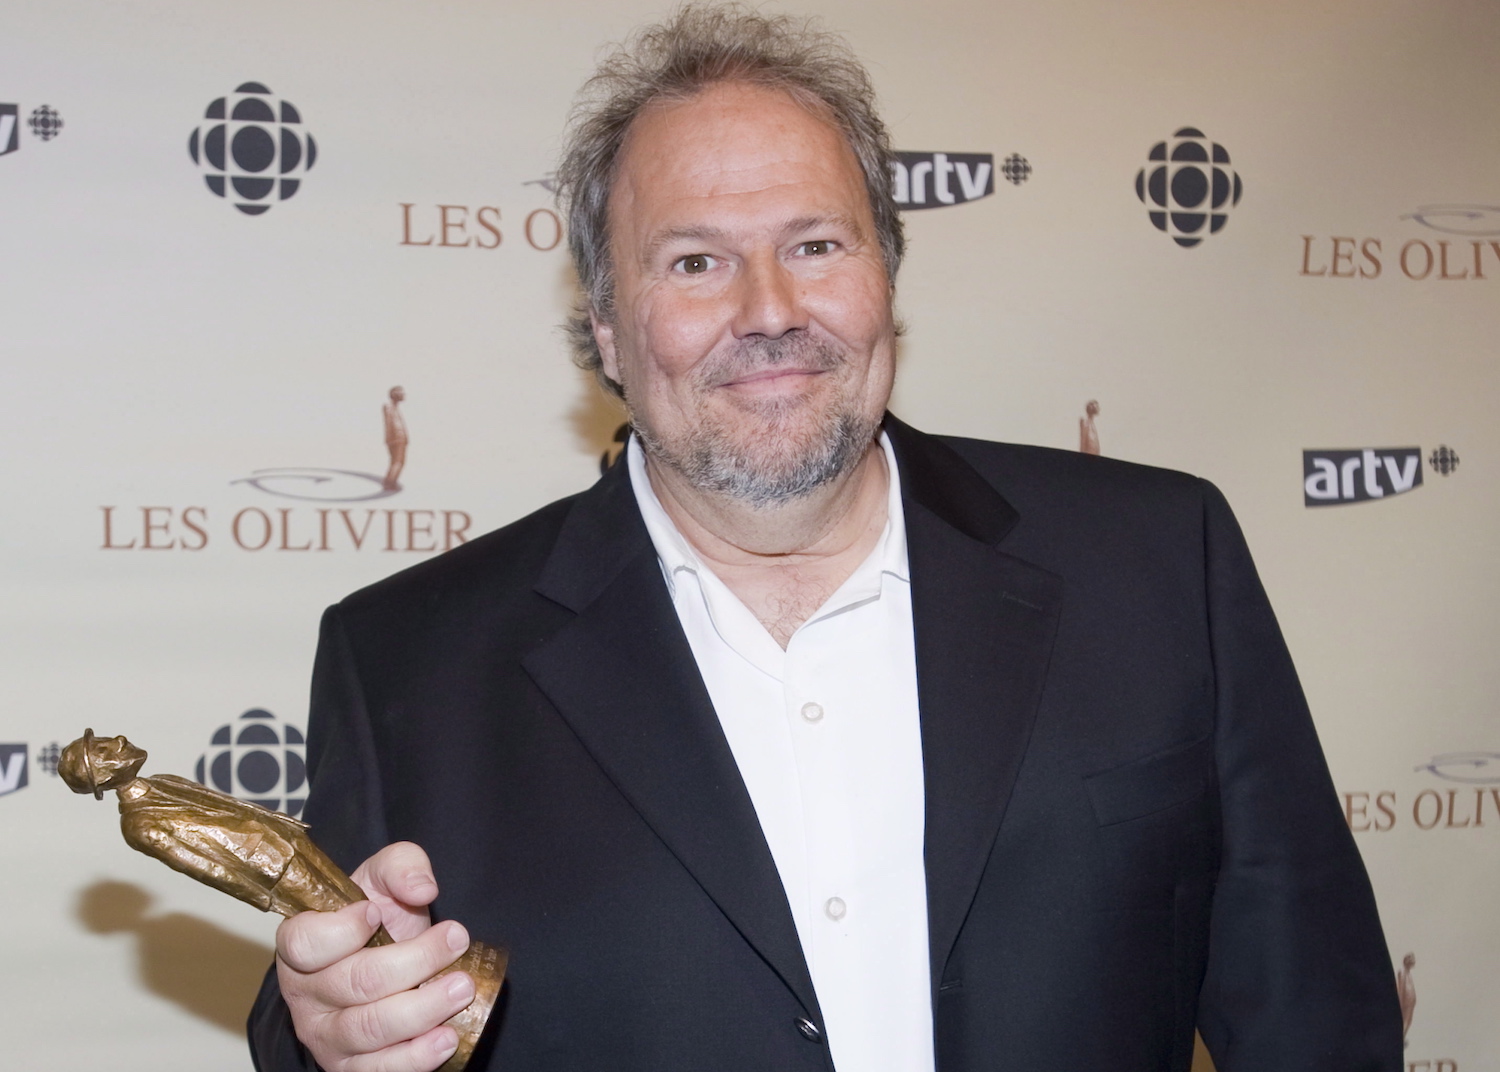 Jean-Marc Parent holds up his award for best comedy show 'Torture' at the Olivier awards gala in Montreal, Sunday, May 13, 2012. THE CANADIAN PRESS/Graham Hughes